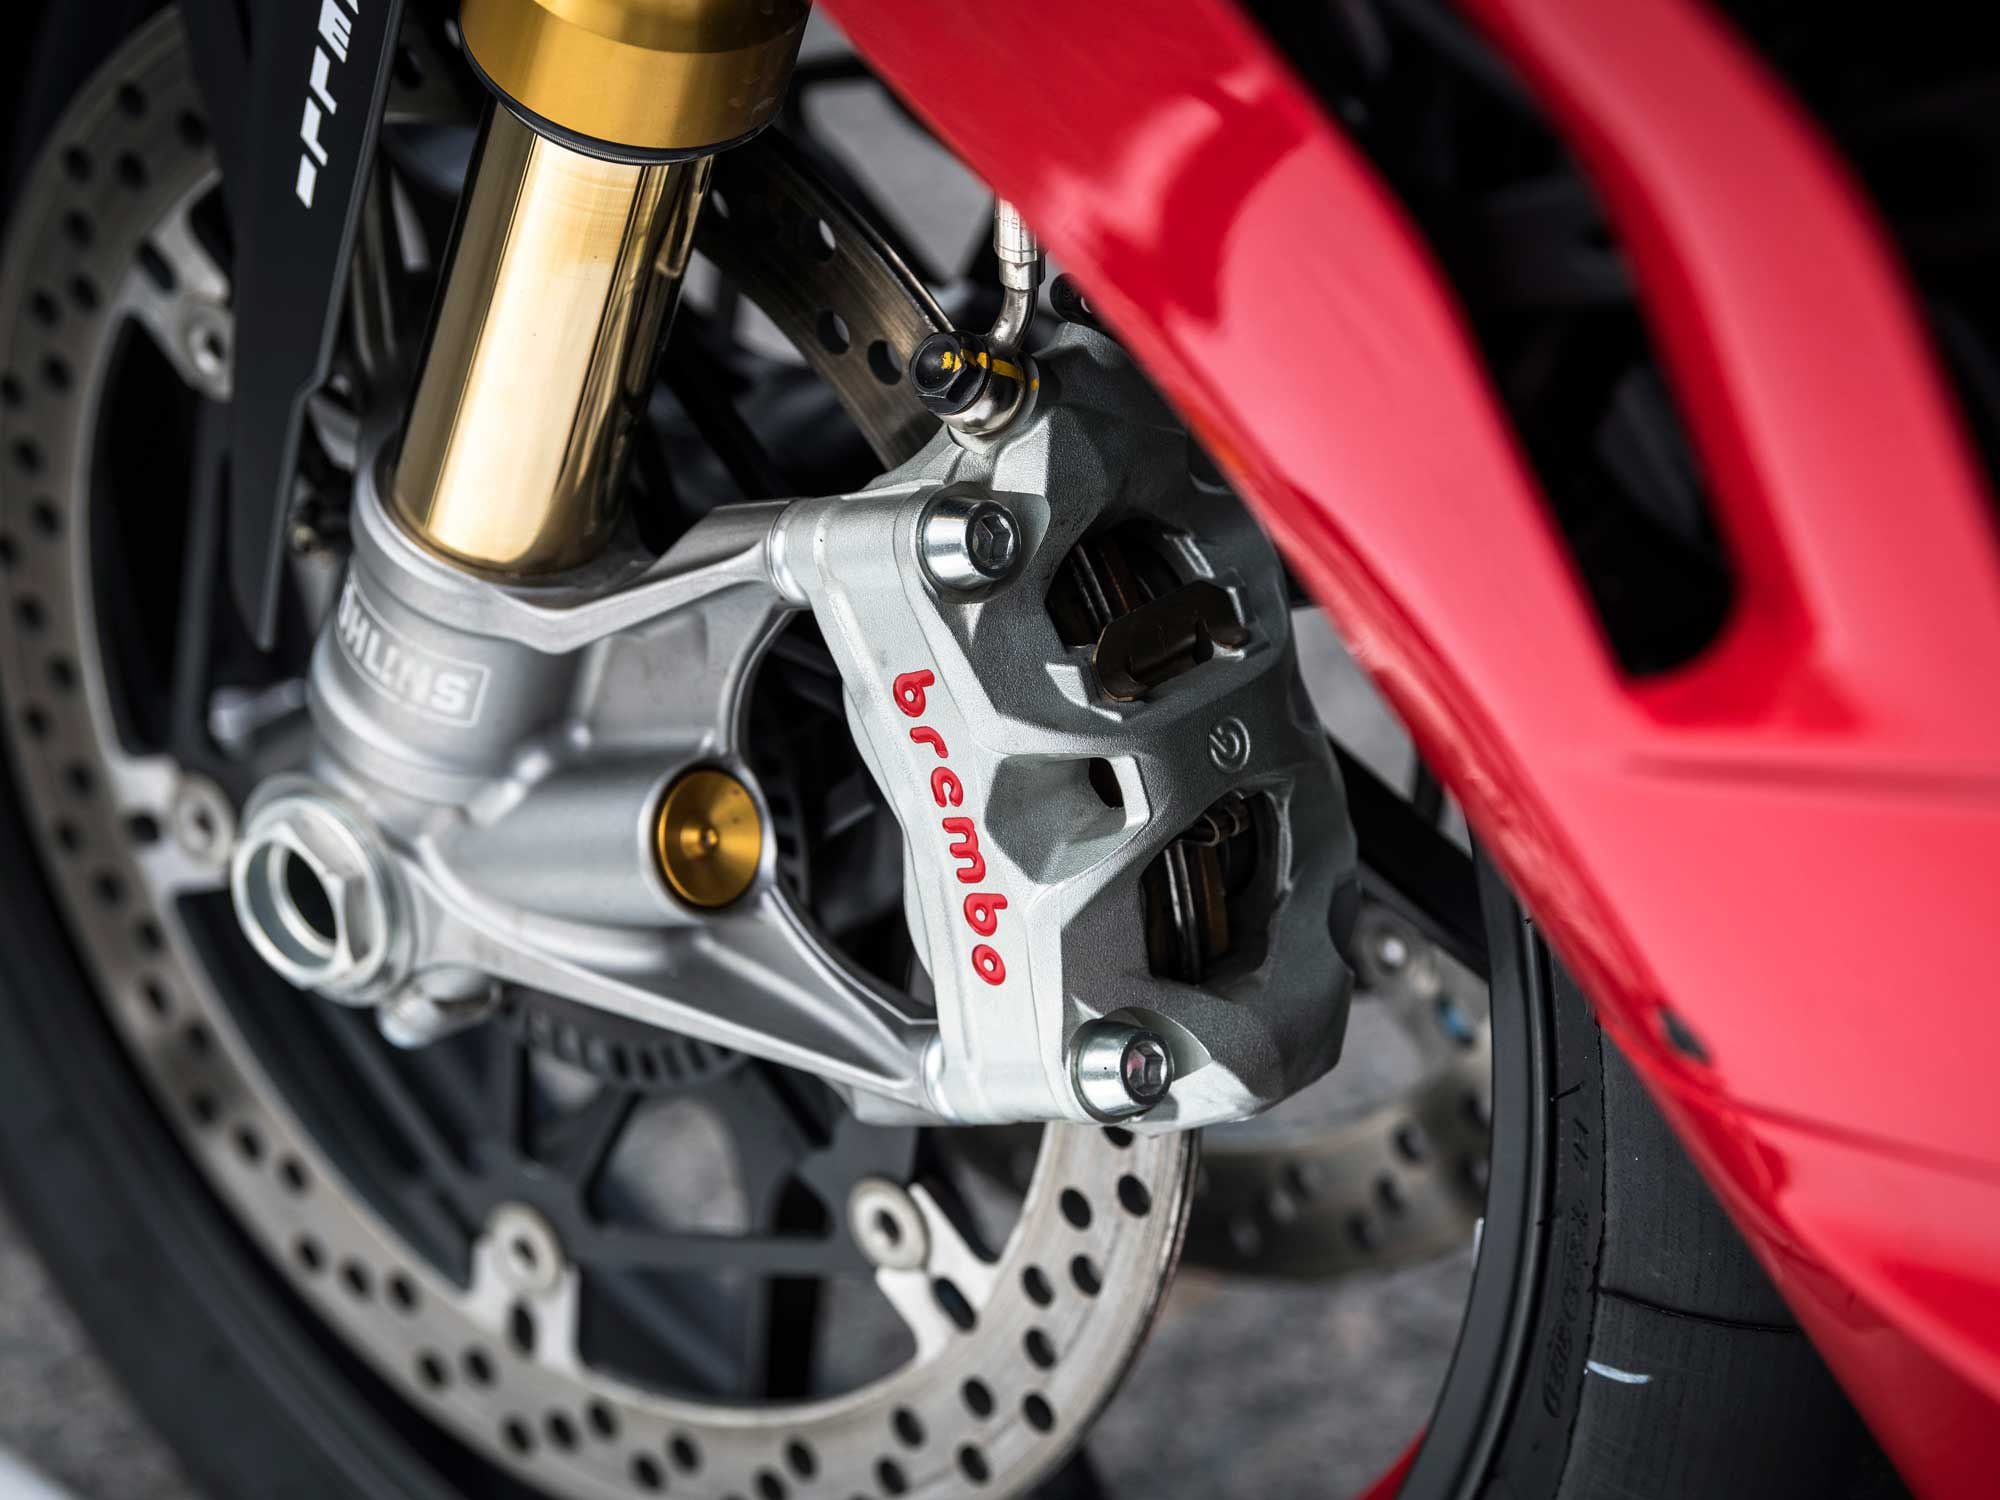 The Öhlins NPX gas-charged fork is a revelation, boosting the already very high handling prowess of the Panigale V4 S, especially during braking and corner entry.